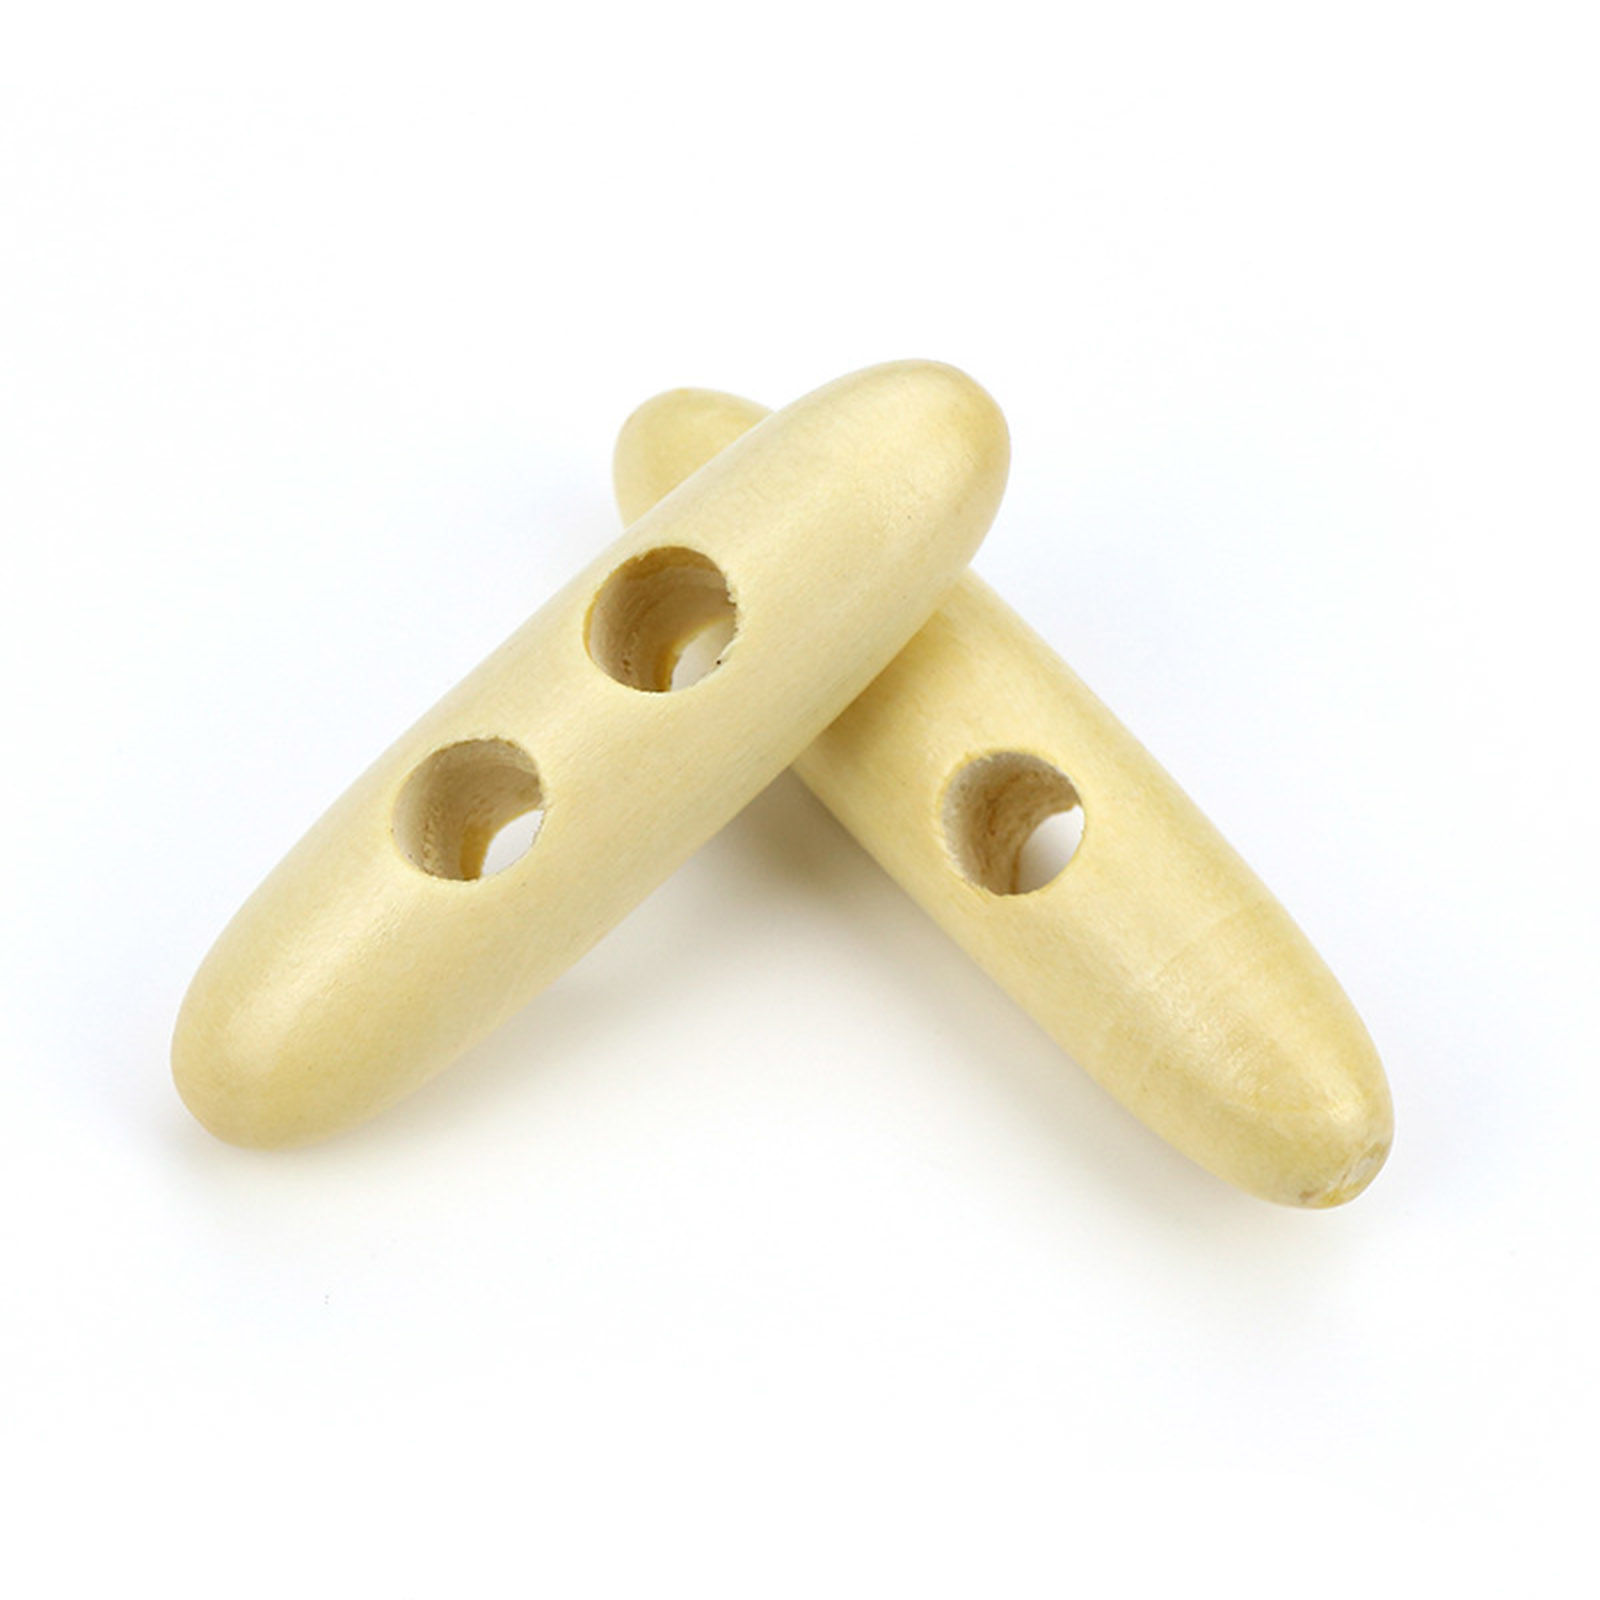 Picture of Wood Horn Buttons Scrapbooking 2 Holes Marquise Natural 4.5cm long, 50 PCs